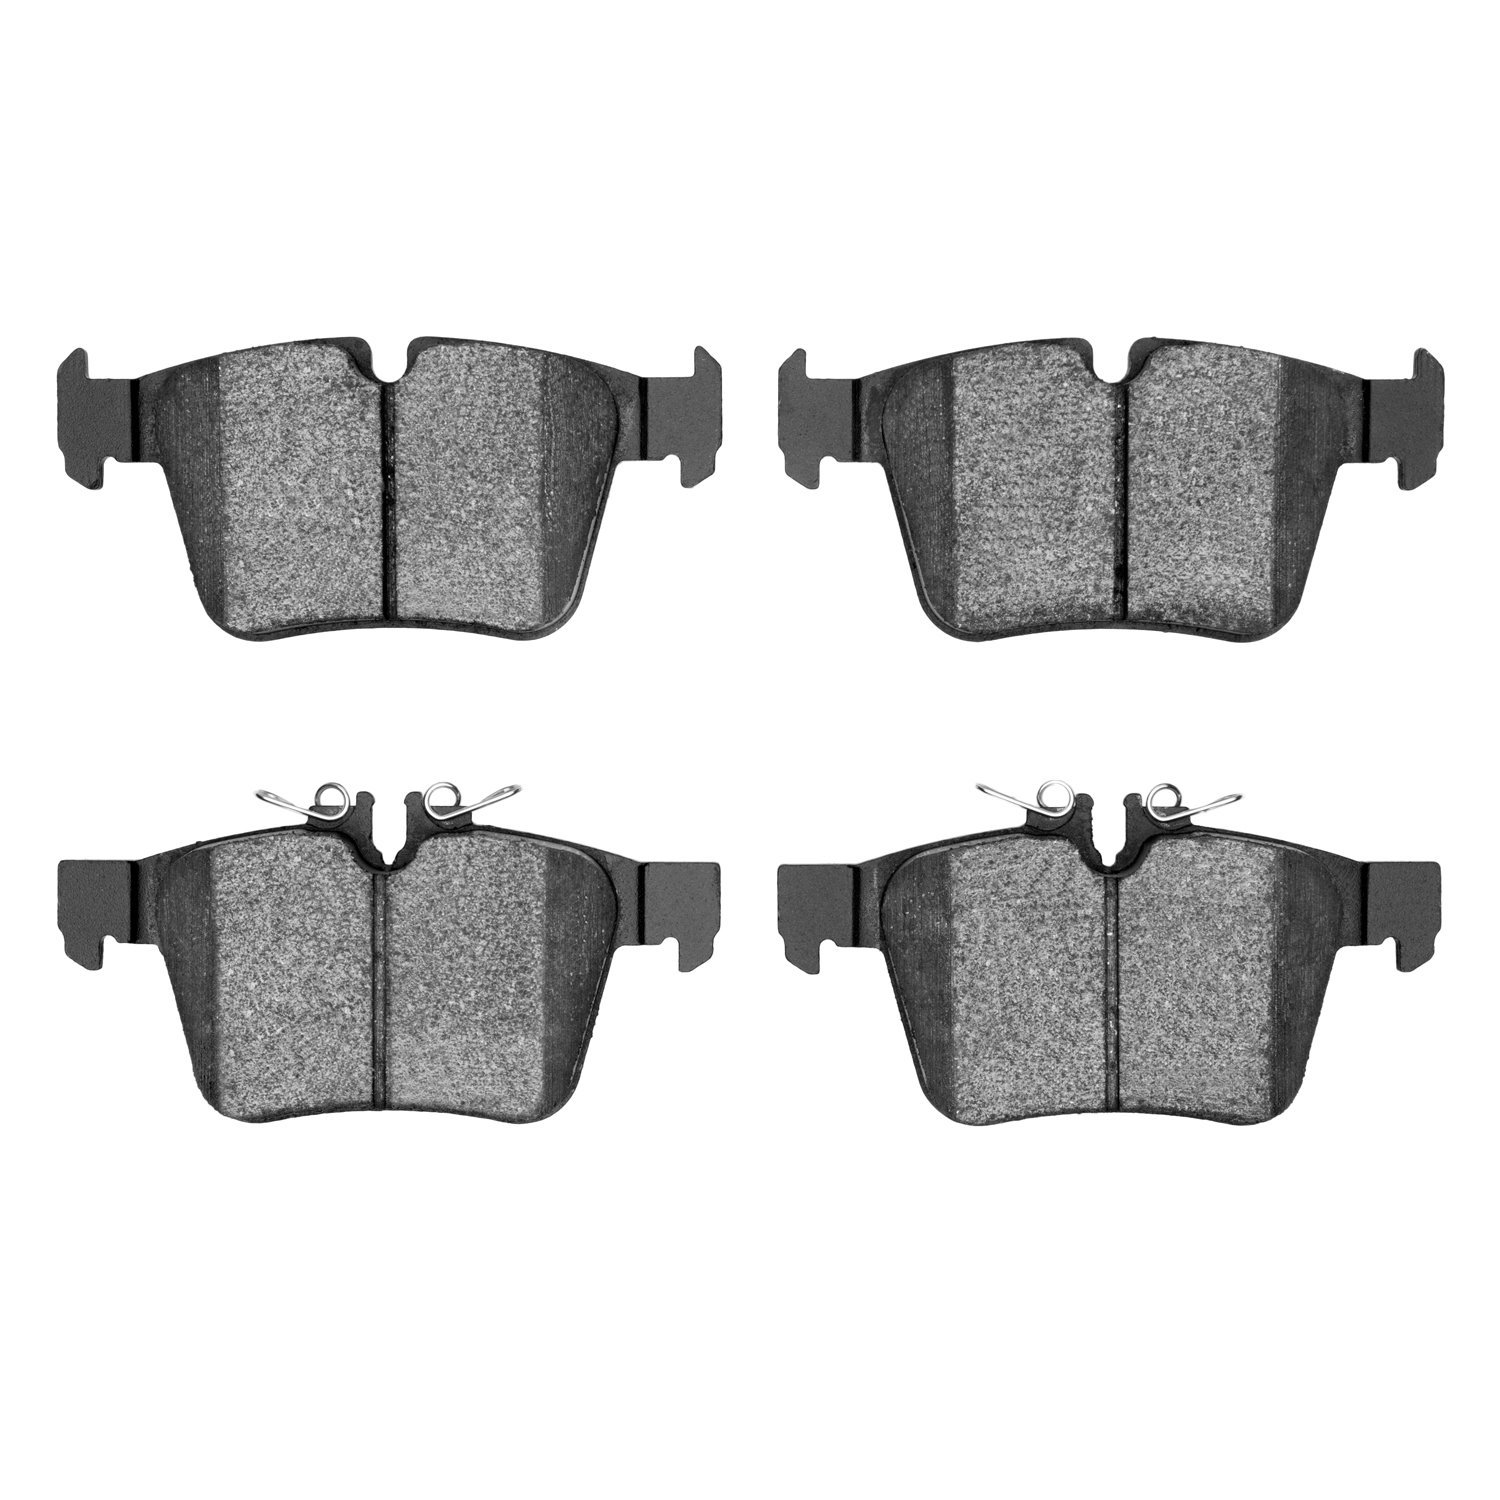 1600-1795-00 5000 Euro Ceramic Brake Pads, Fits Select Mercedes-Benz, Position: Rear